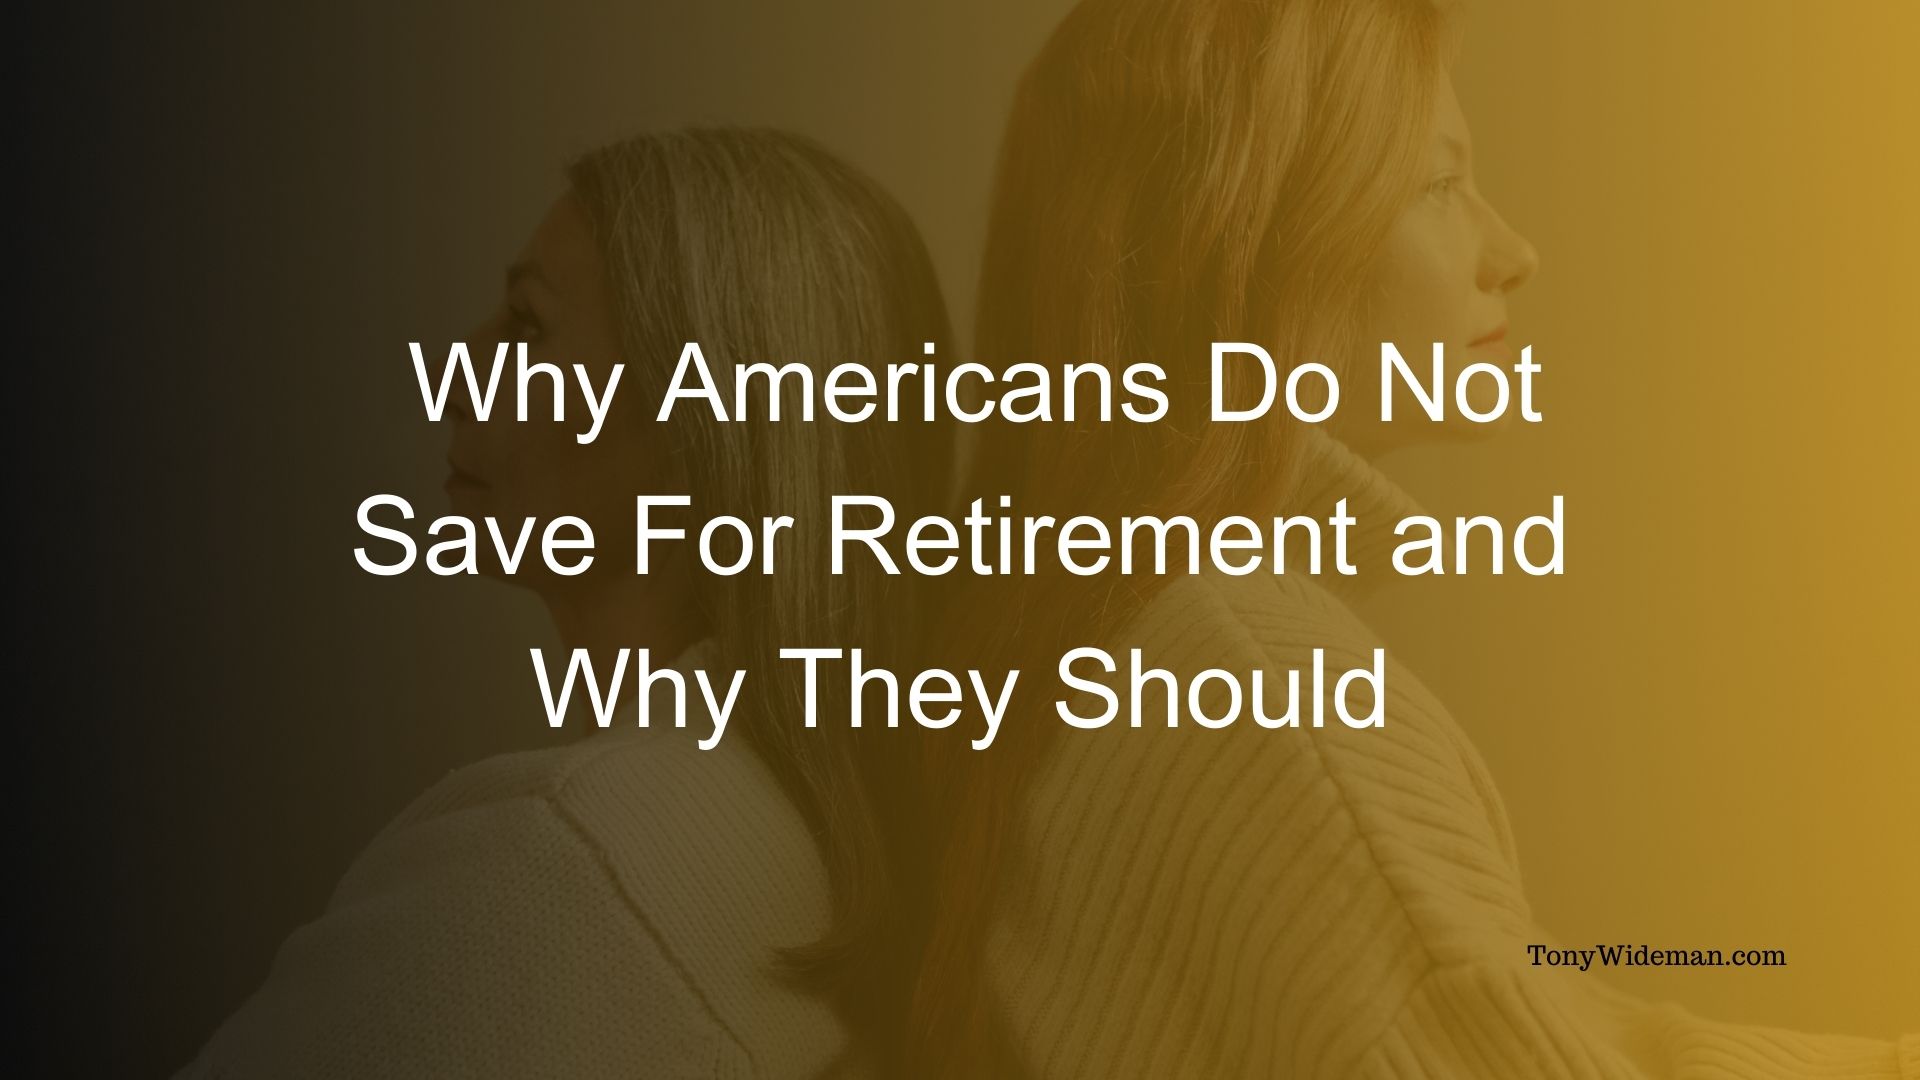 Why Americans Do Not Save For Retirement and Why They Should